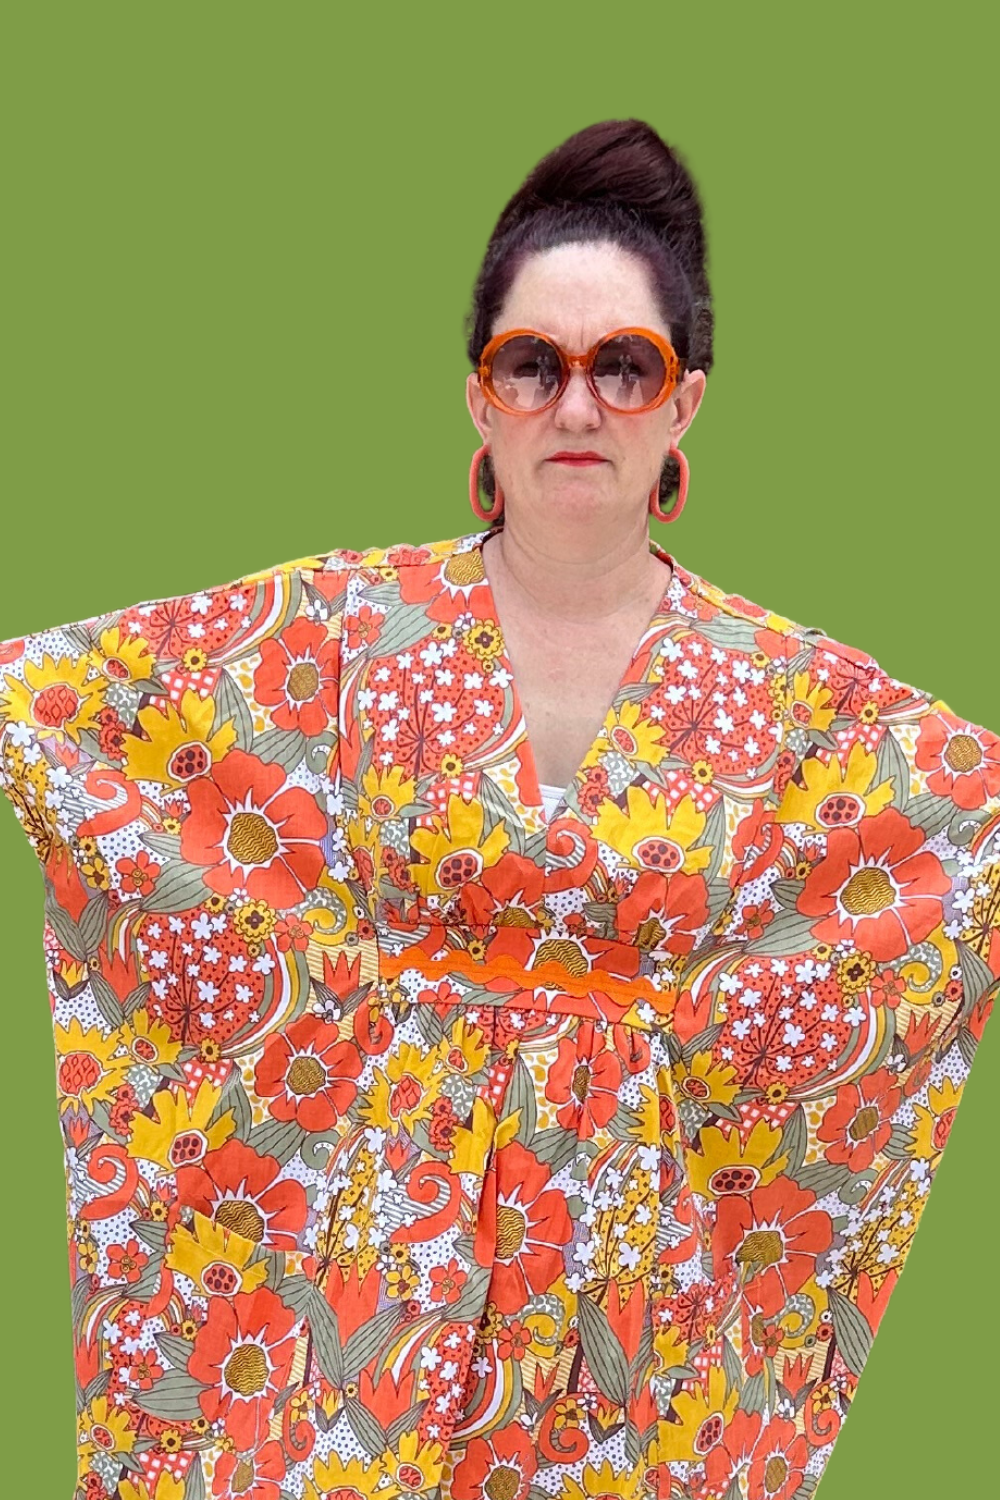 Brown-haired model wearing sunglasses and bright floral print caftan 